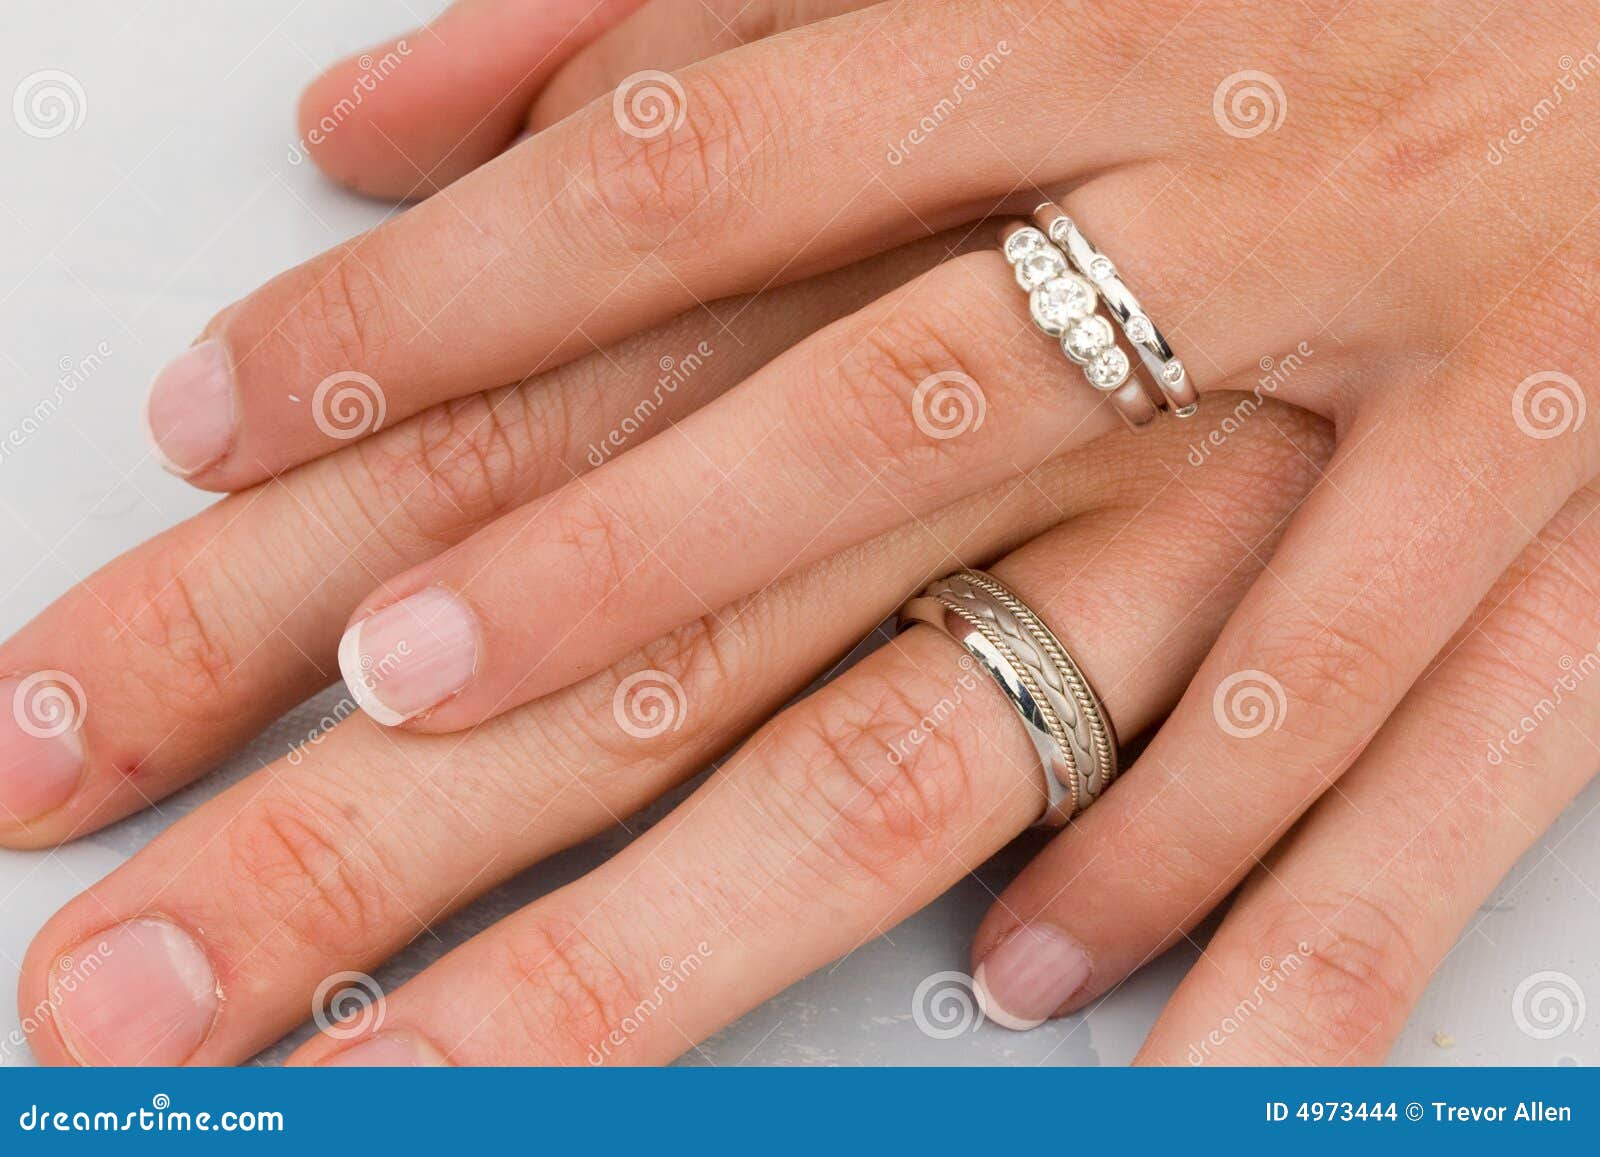 Stock Images: Wedding Rings on hands